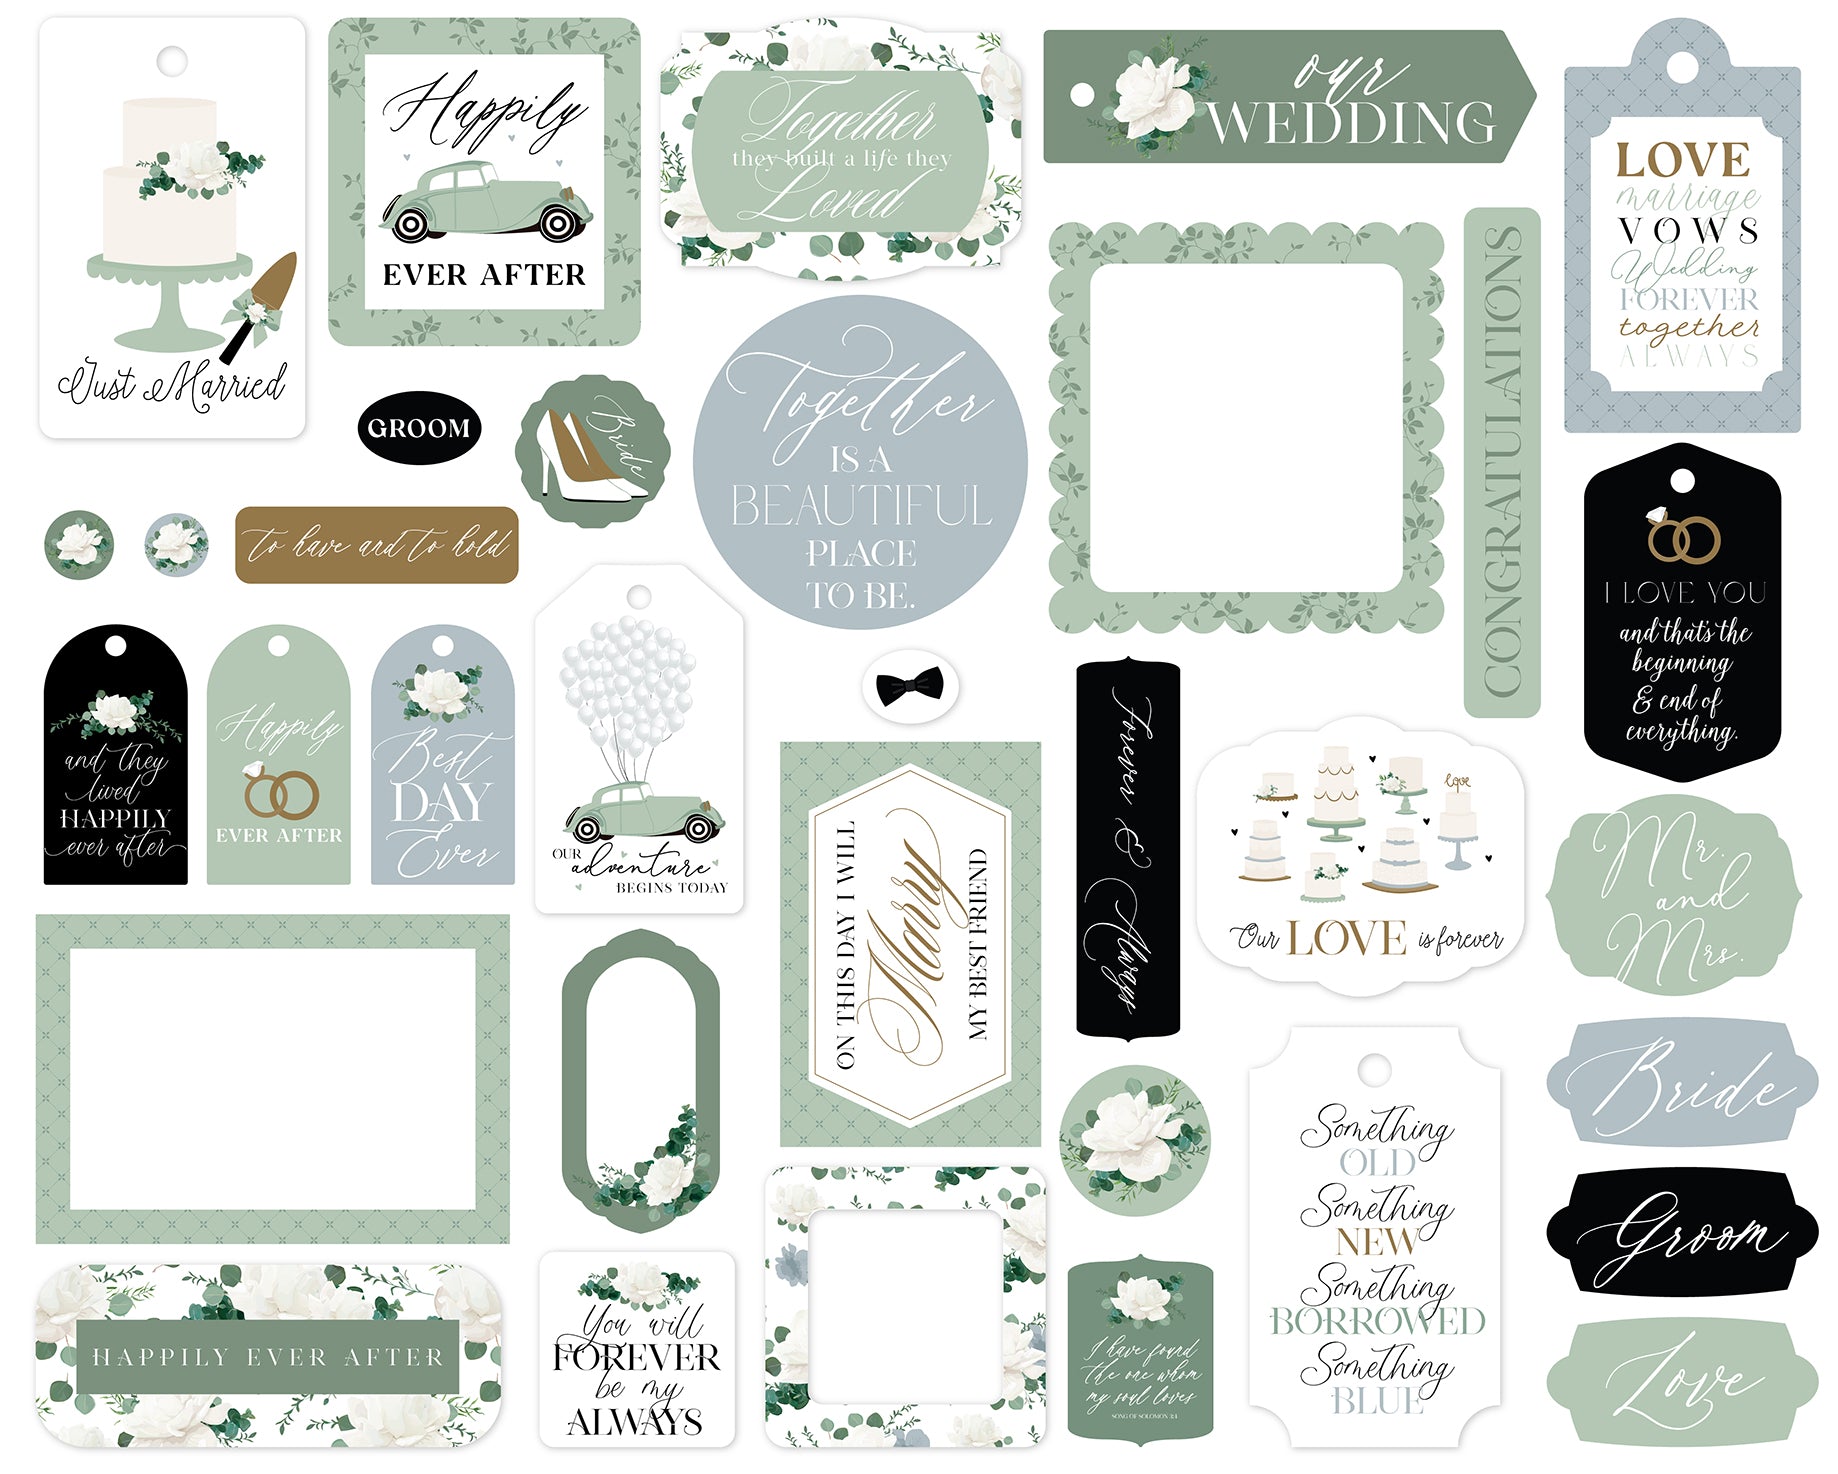 Wedding Bells Collection 5 x 5 Scrapbook Frames & Tags by Echo Park